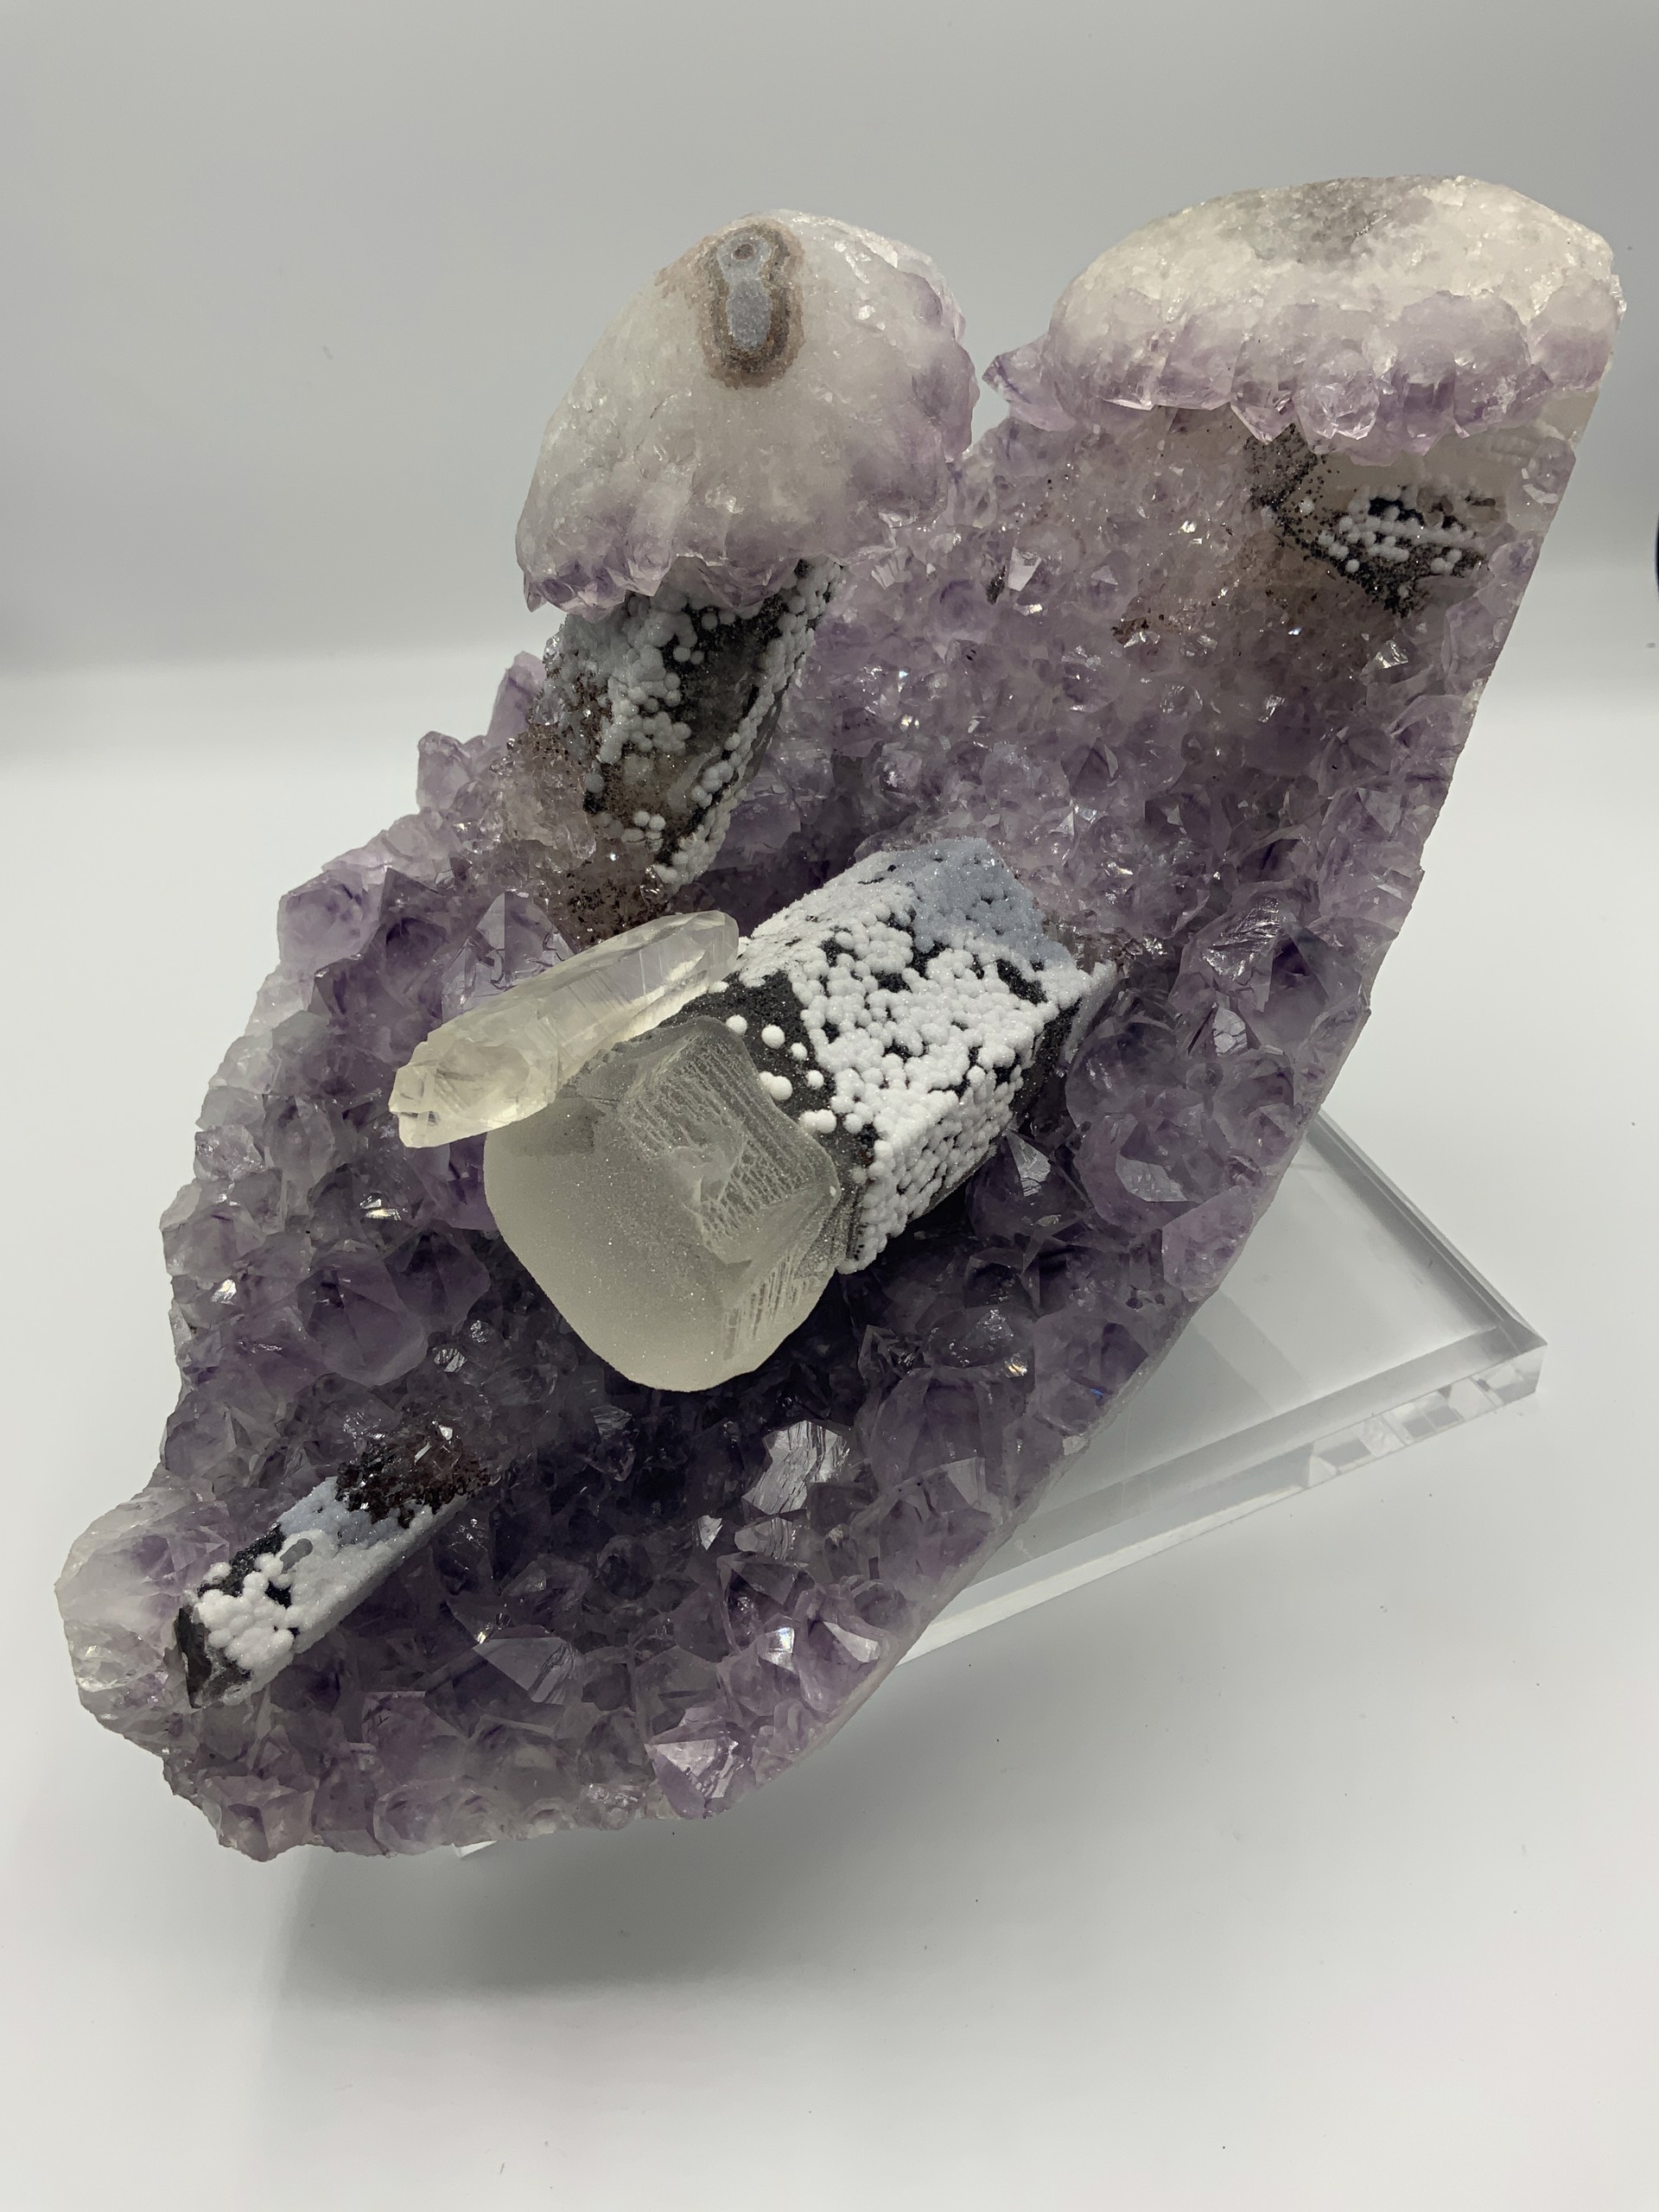 Amethyst with inclusions by Richard Kessler